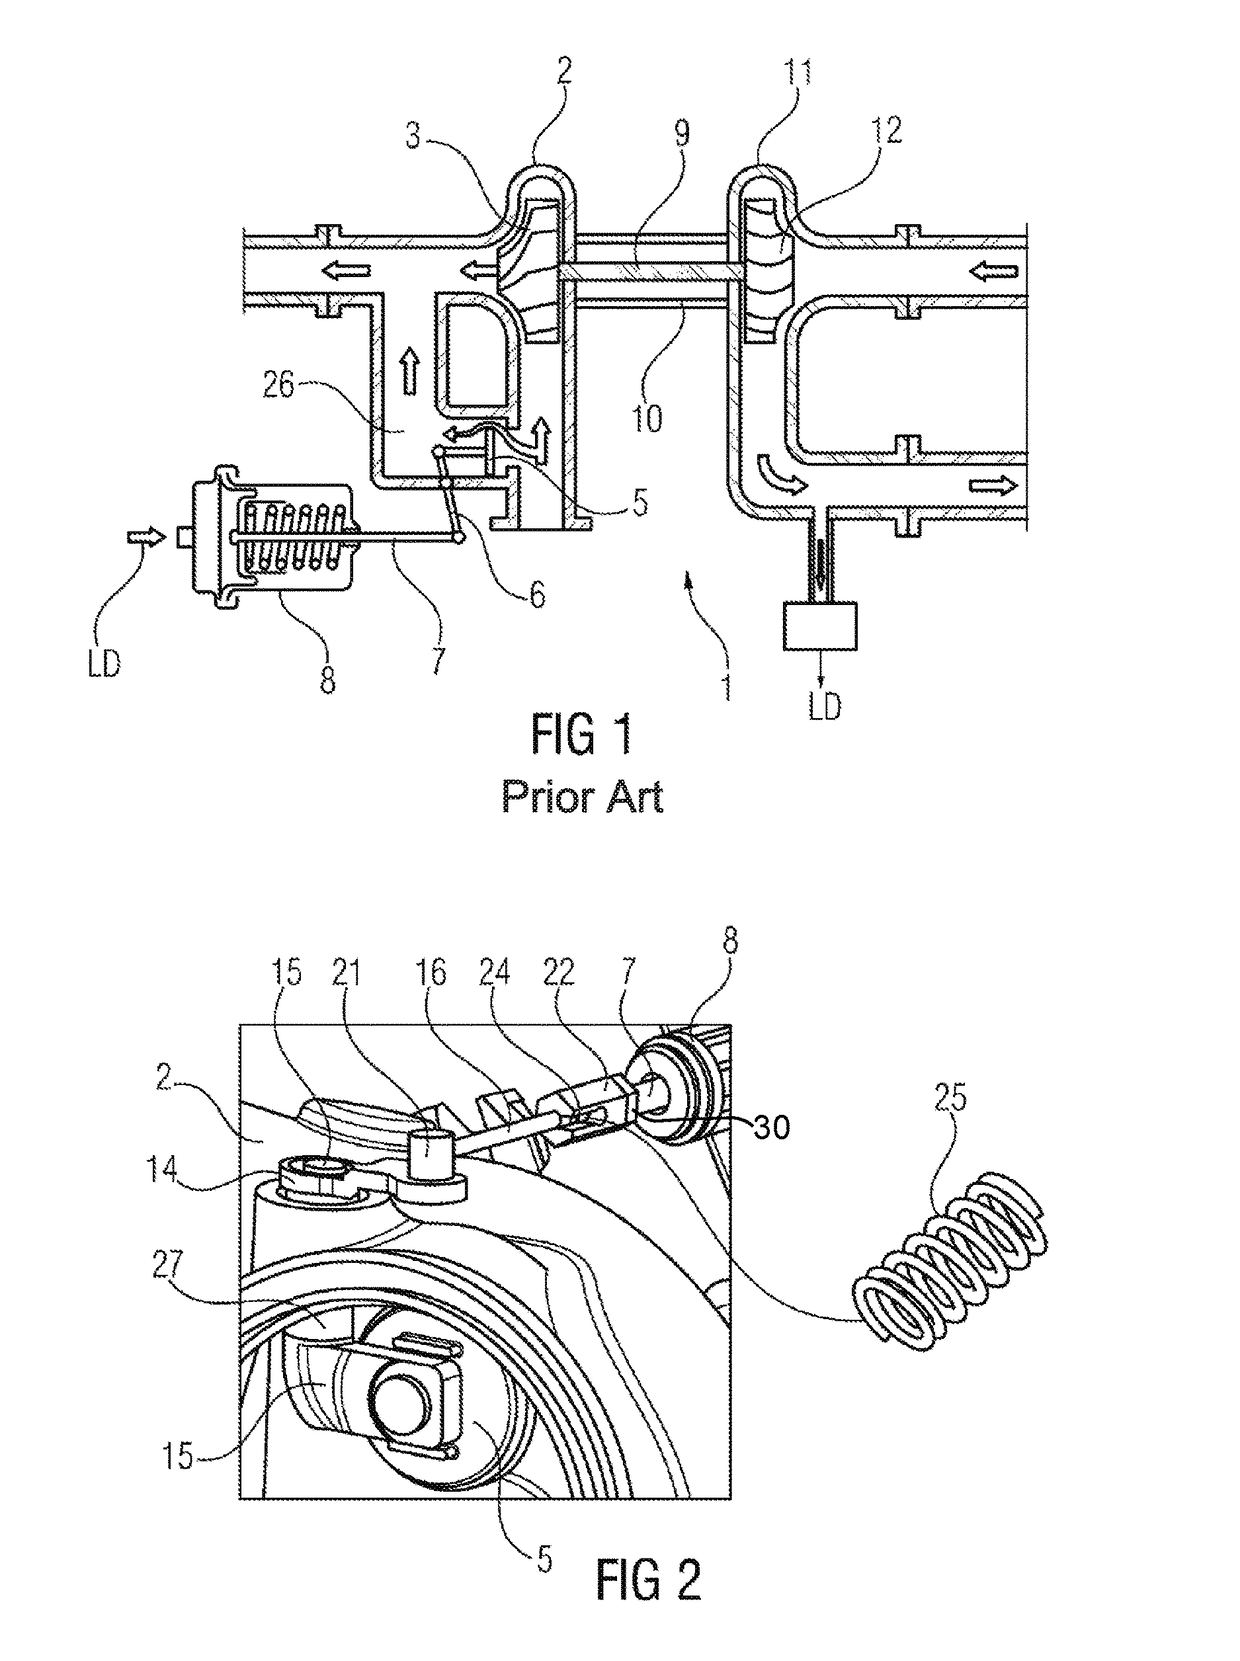 Device for actuating the wastegate flap of an exhaust gas turbocharger